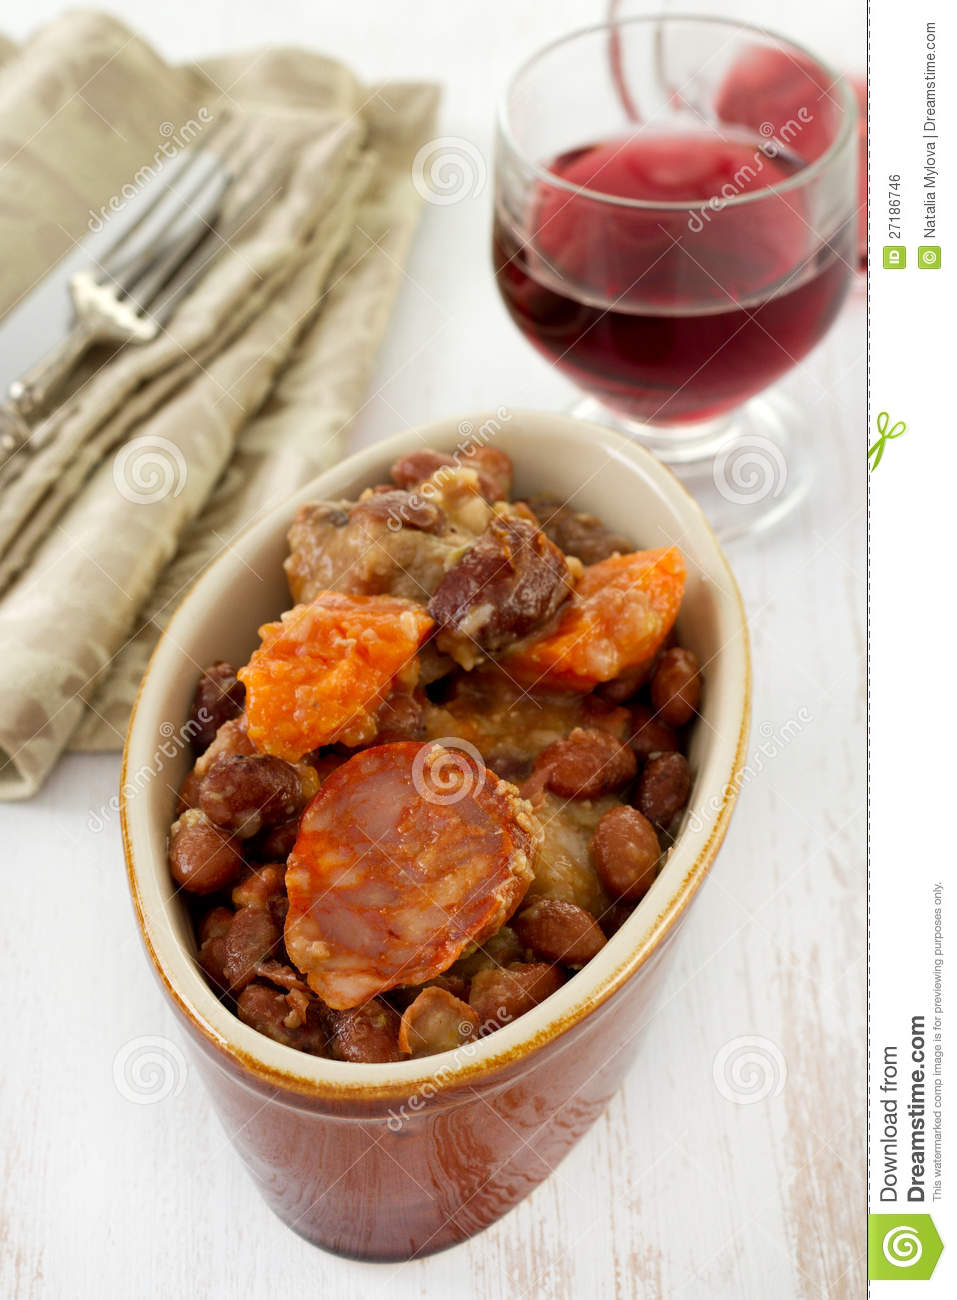 Sausages And Meat With Beans Royalty Free Stock Image   Image    